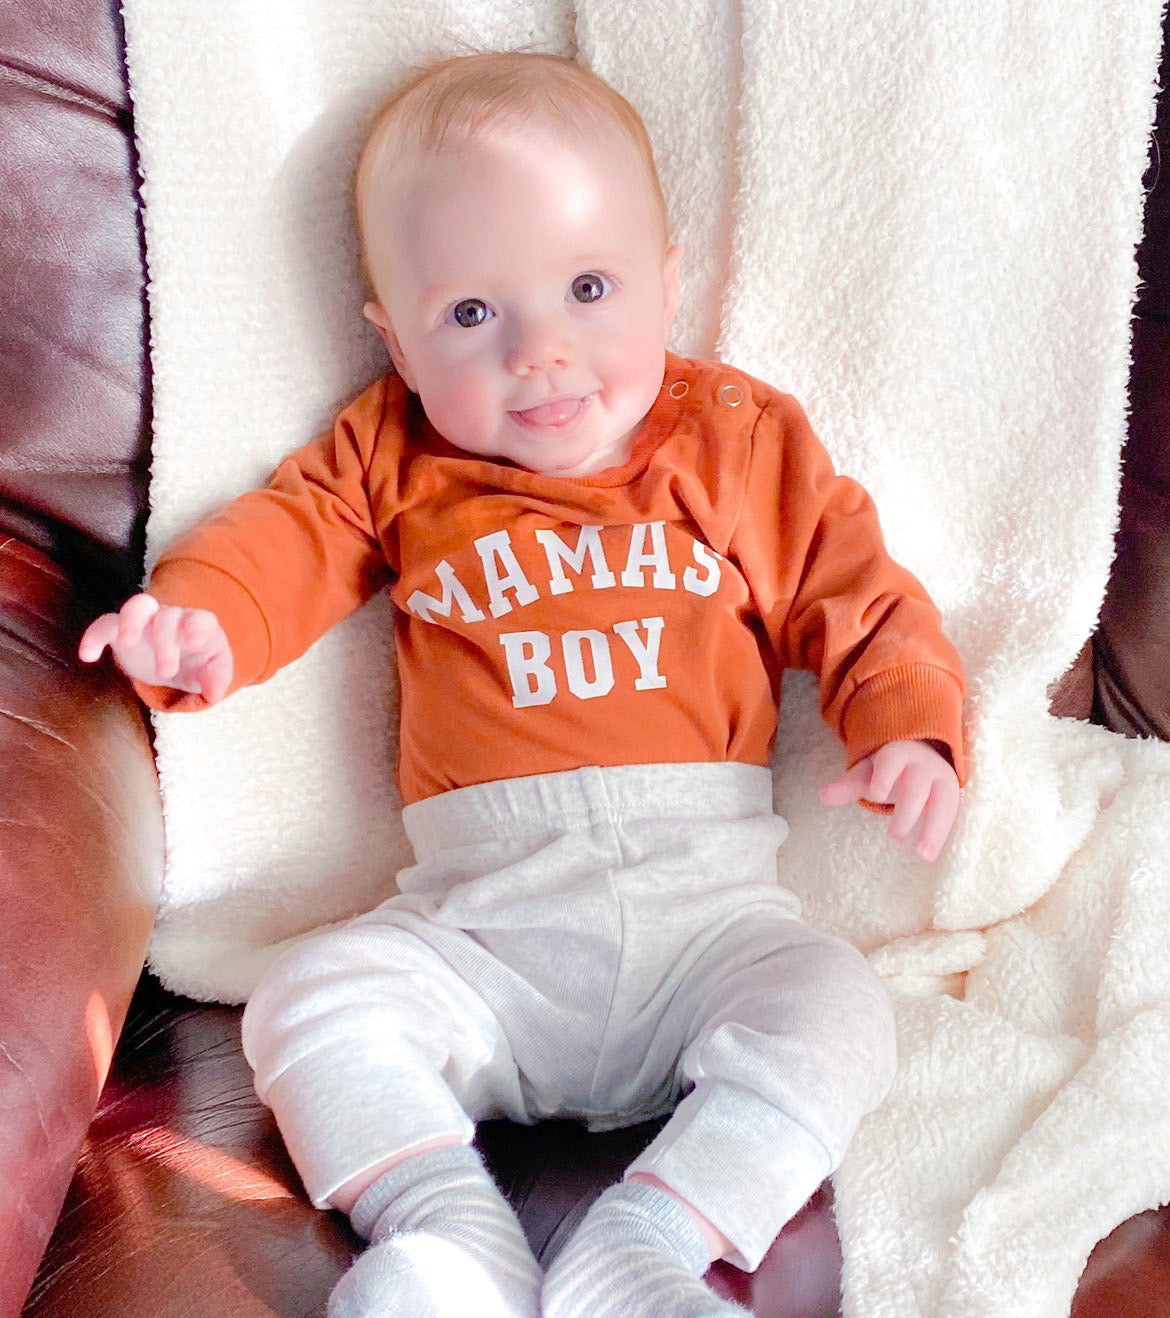 Mamas Boy Romper - 18 MONTHS ONLY